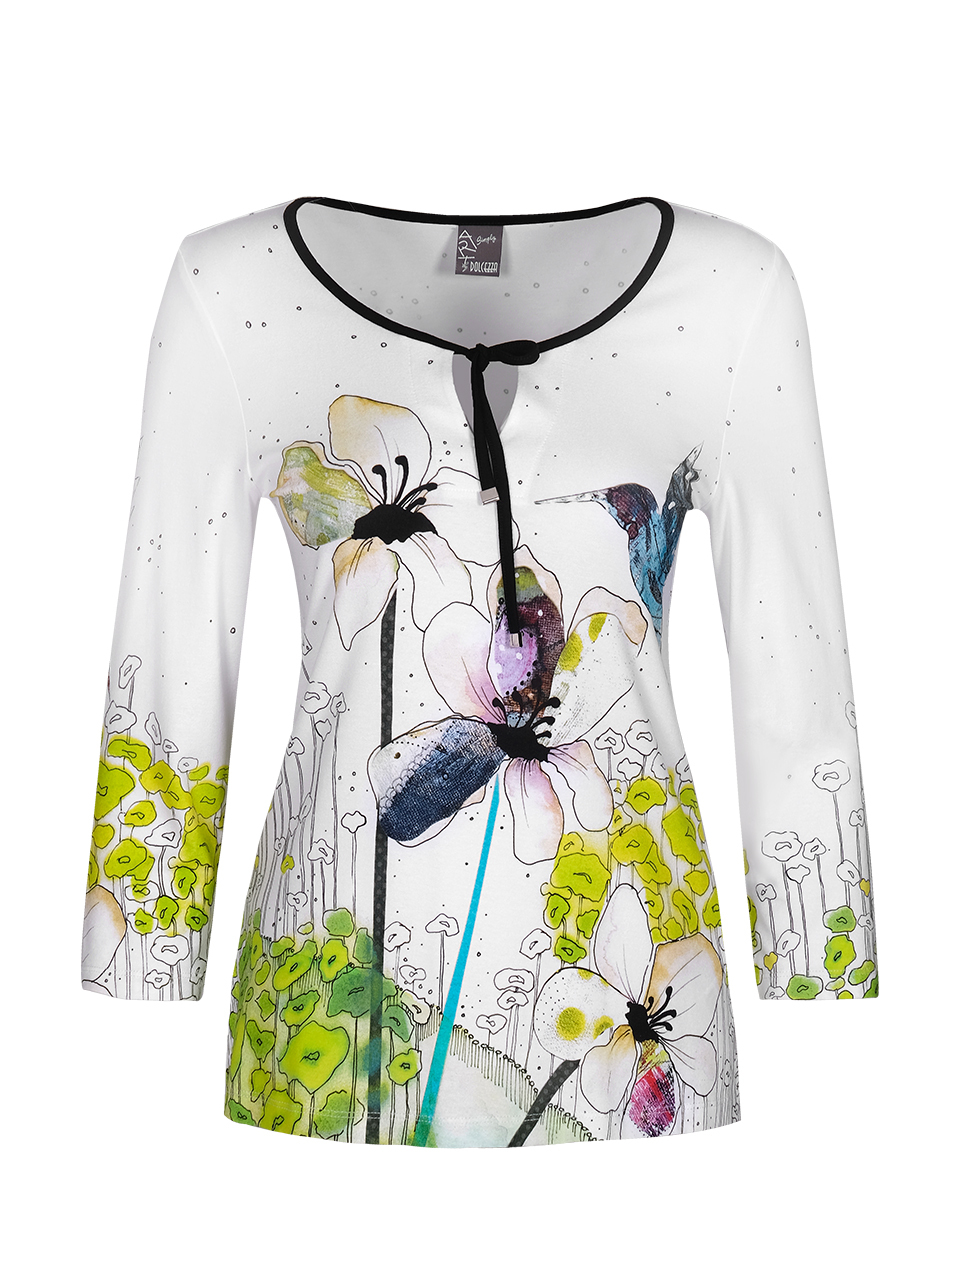 Simply Art Dolcezza: Flowers And A Hummingbird Keyhole Tunic Dolcezza_SimplyArt_22752